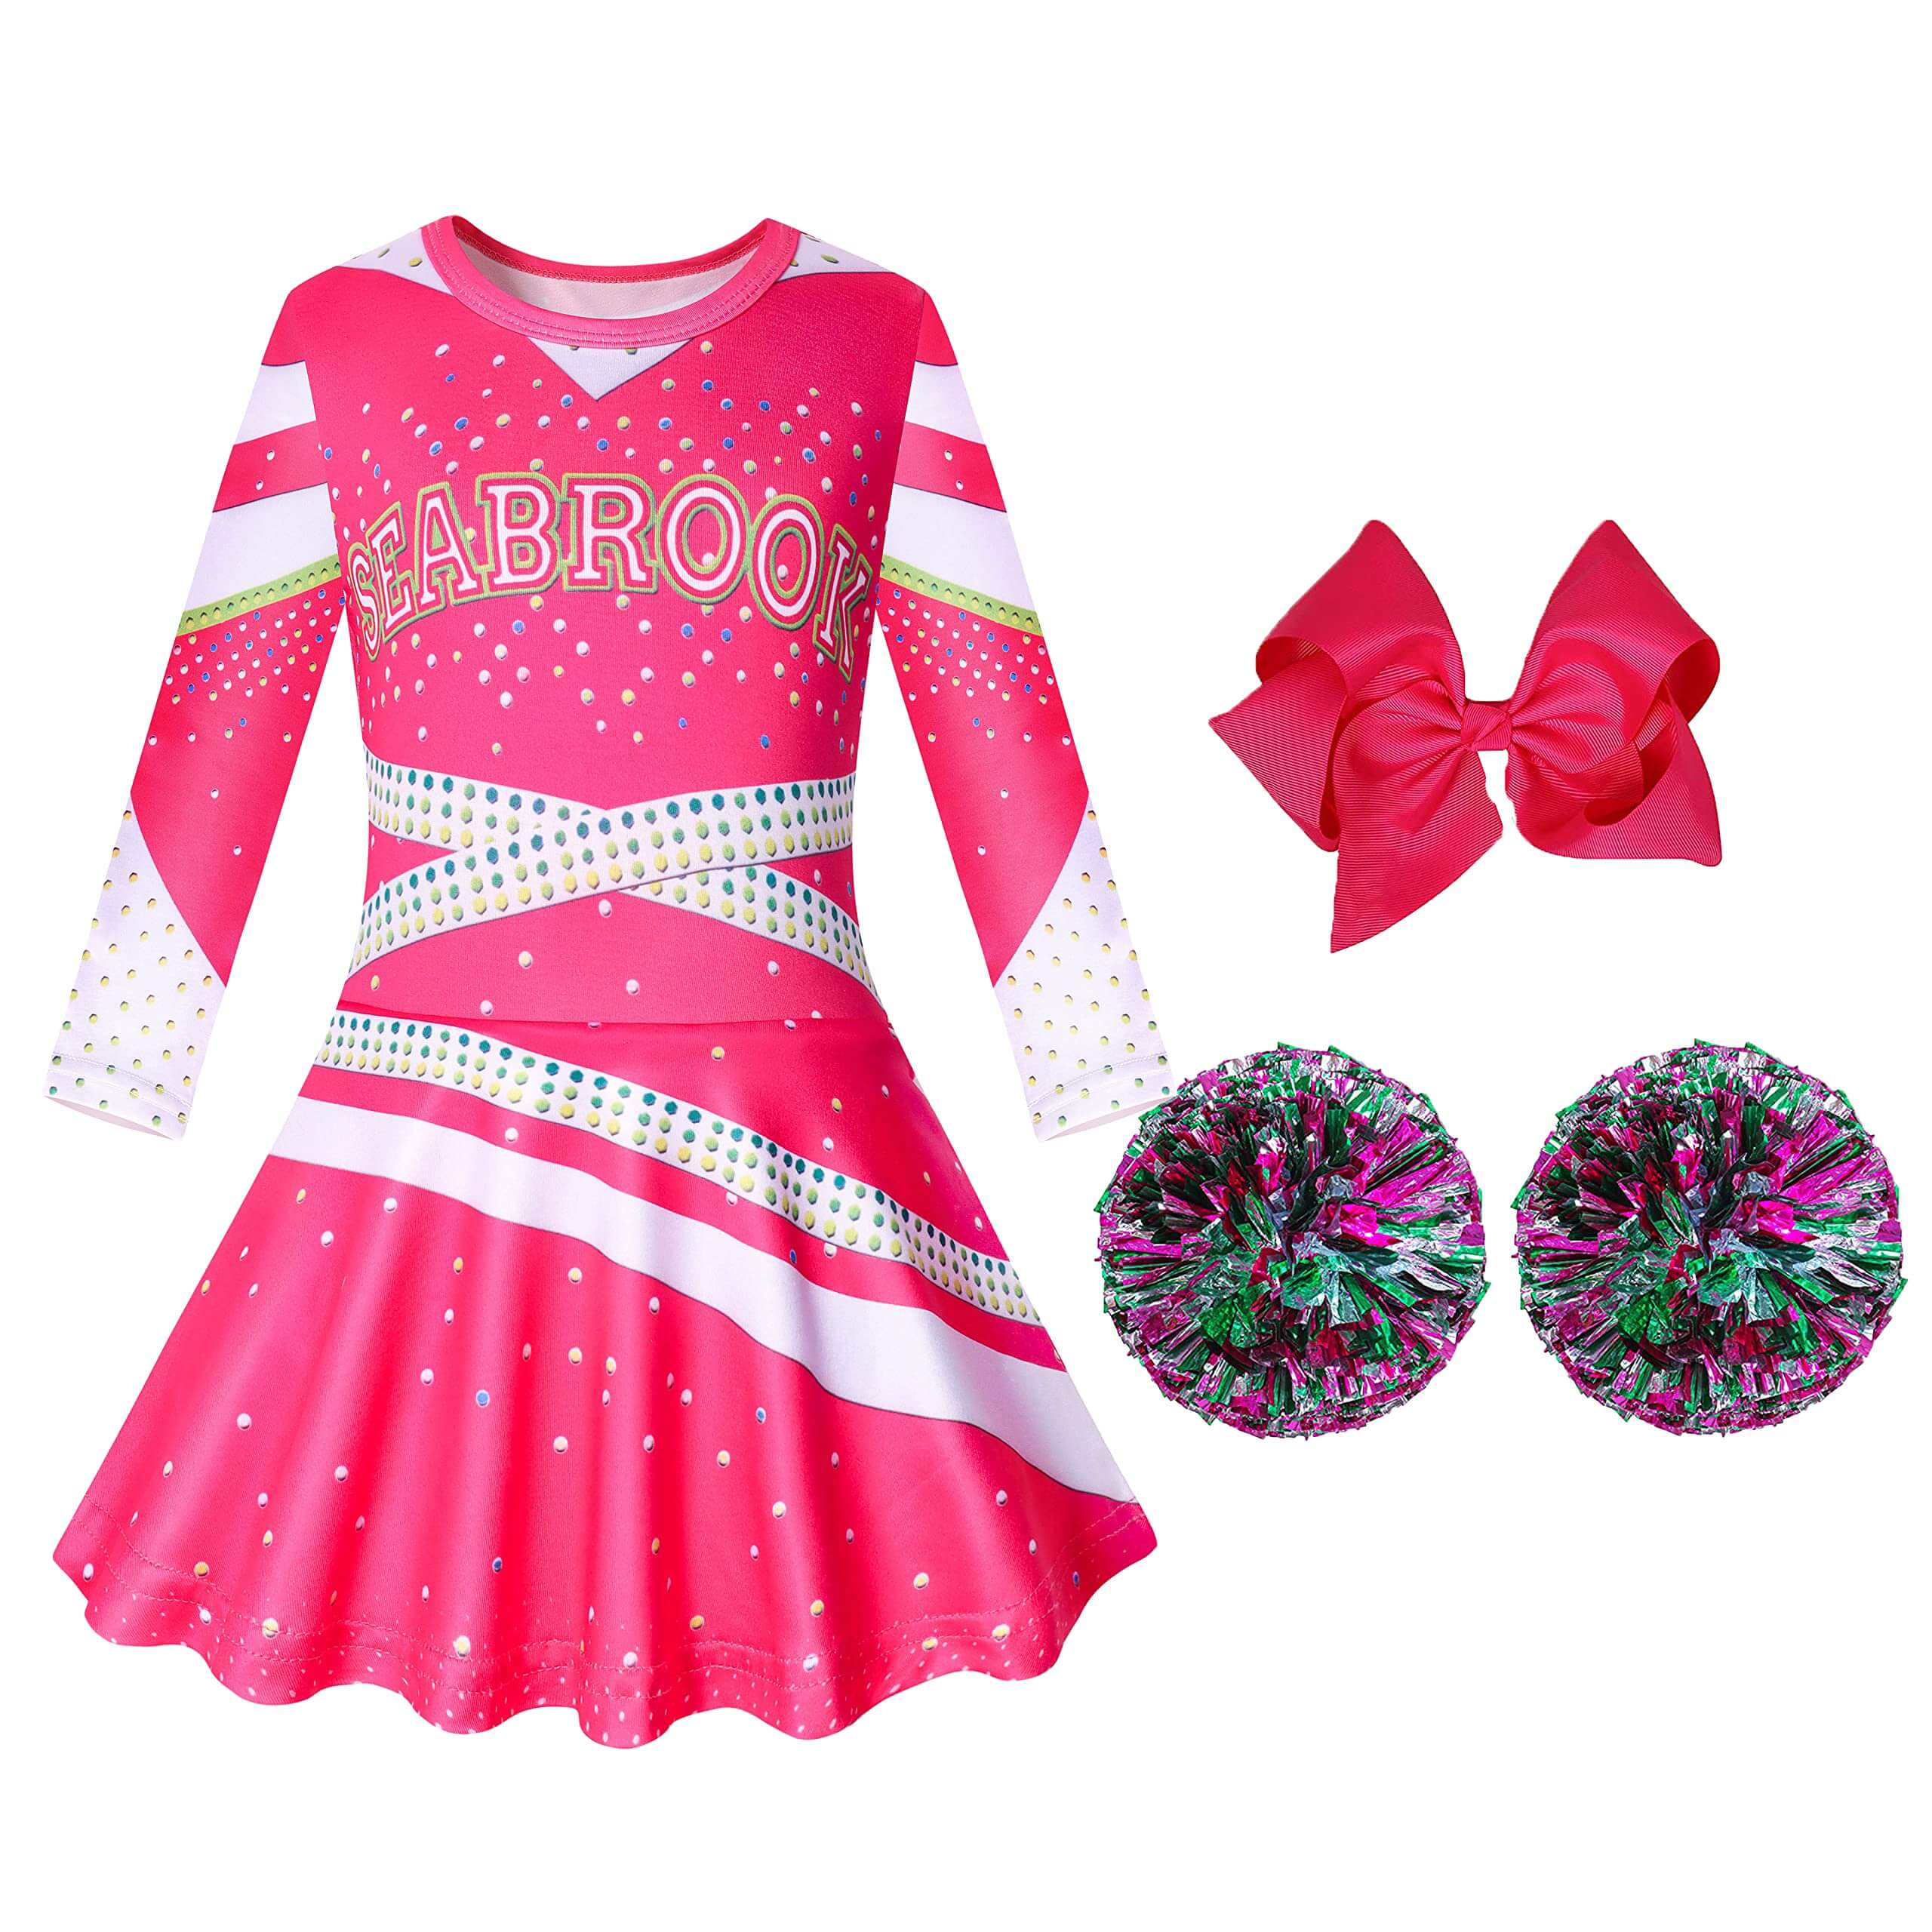 Cheerleader Cosplay Costume Girls Fancy Dress Halloween Party Outfit with Accessories